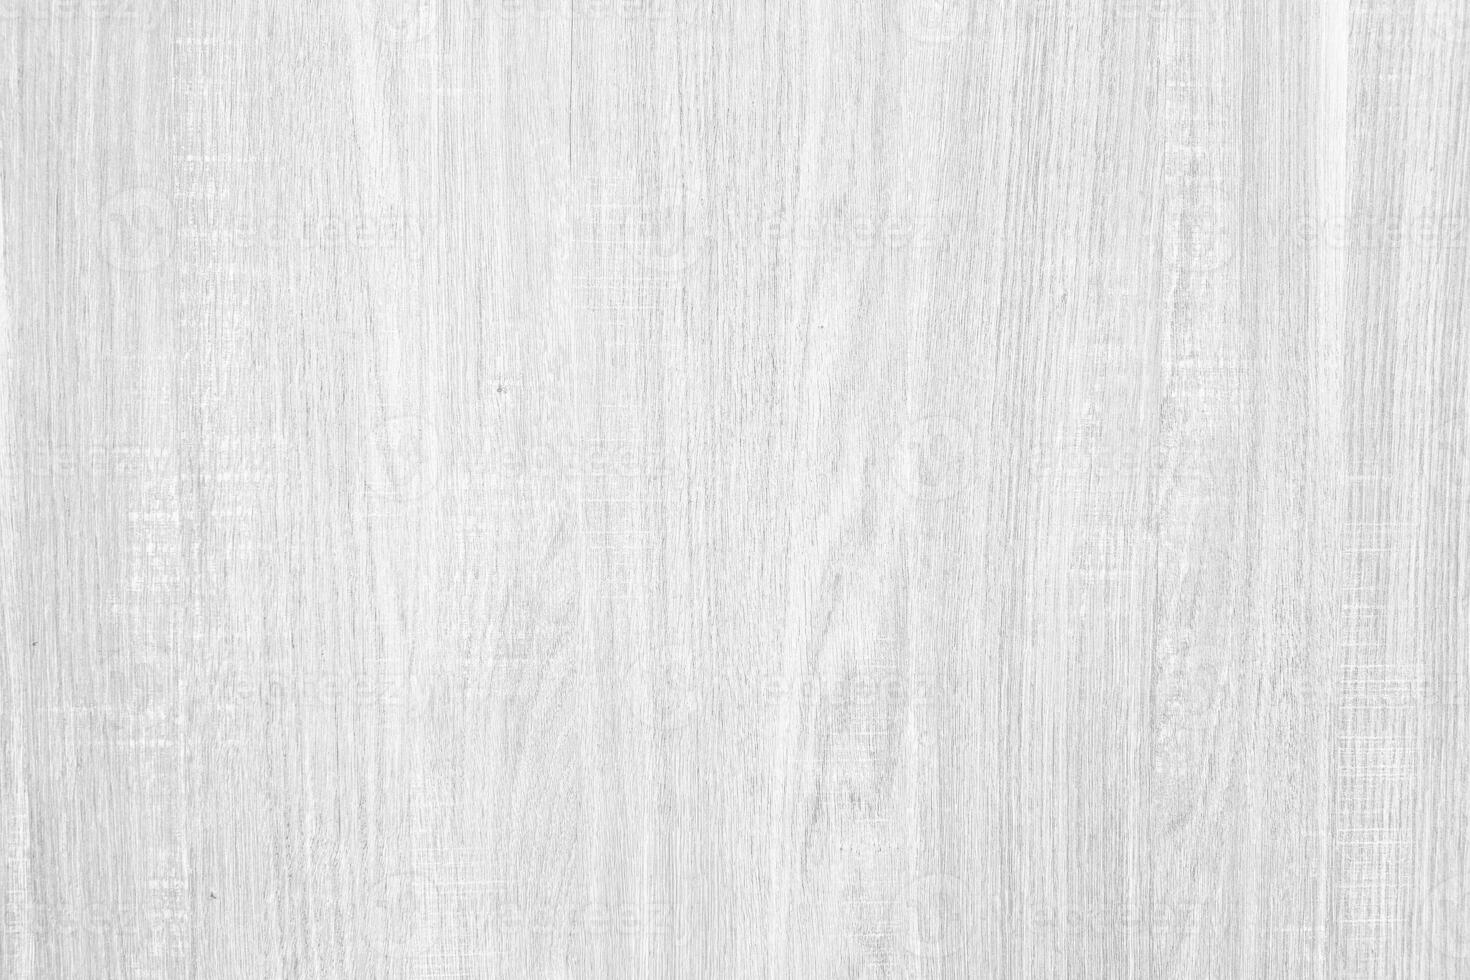 White Wood Board Texture Background. photo